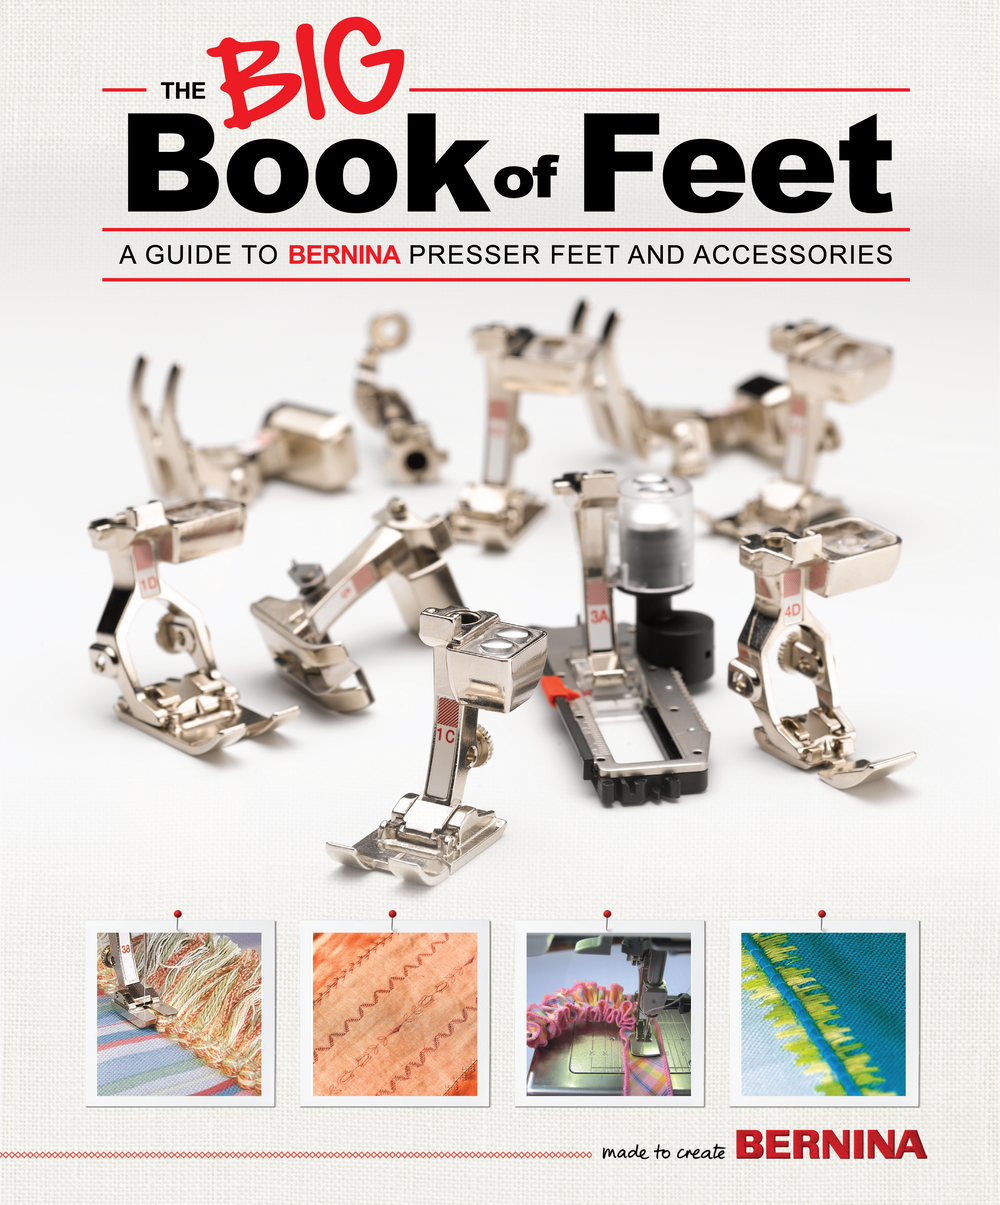 The Big Book of Feet